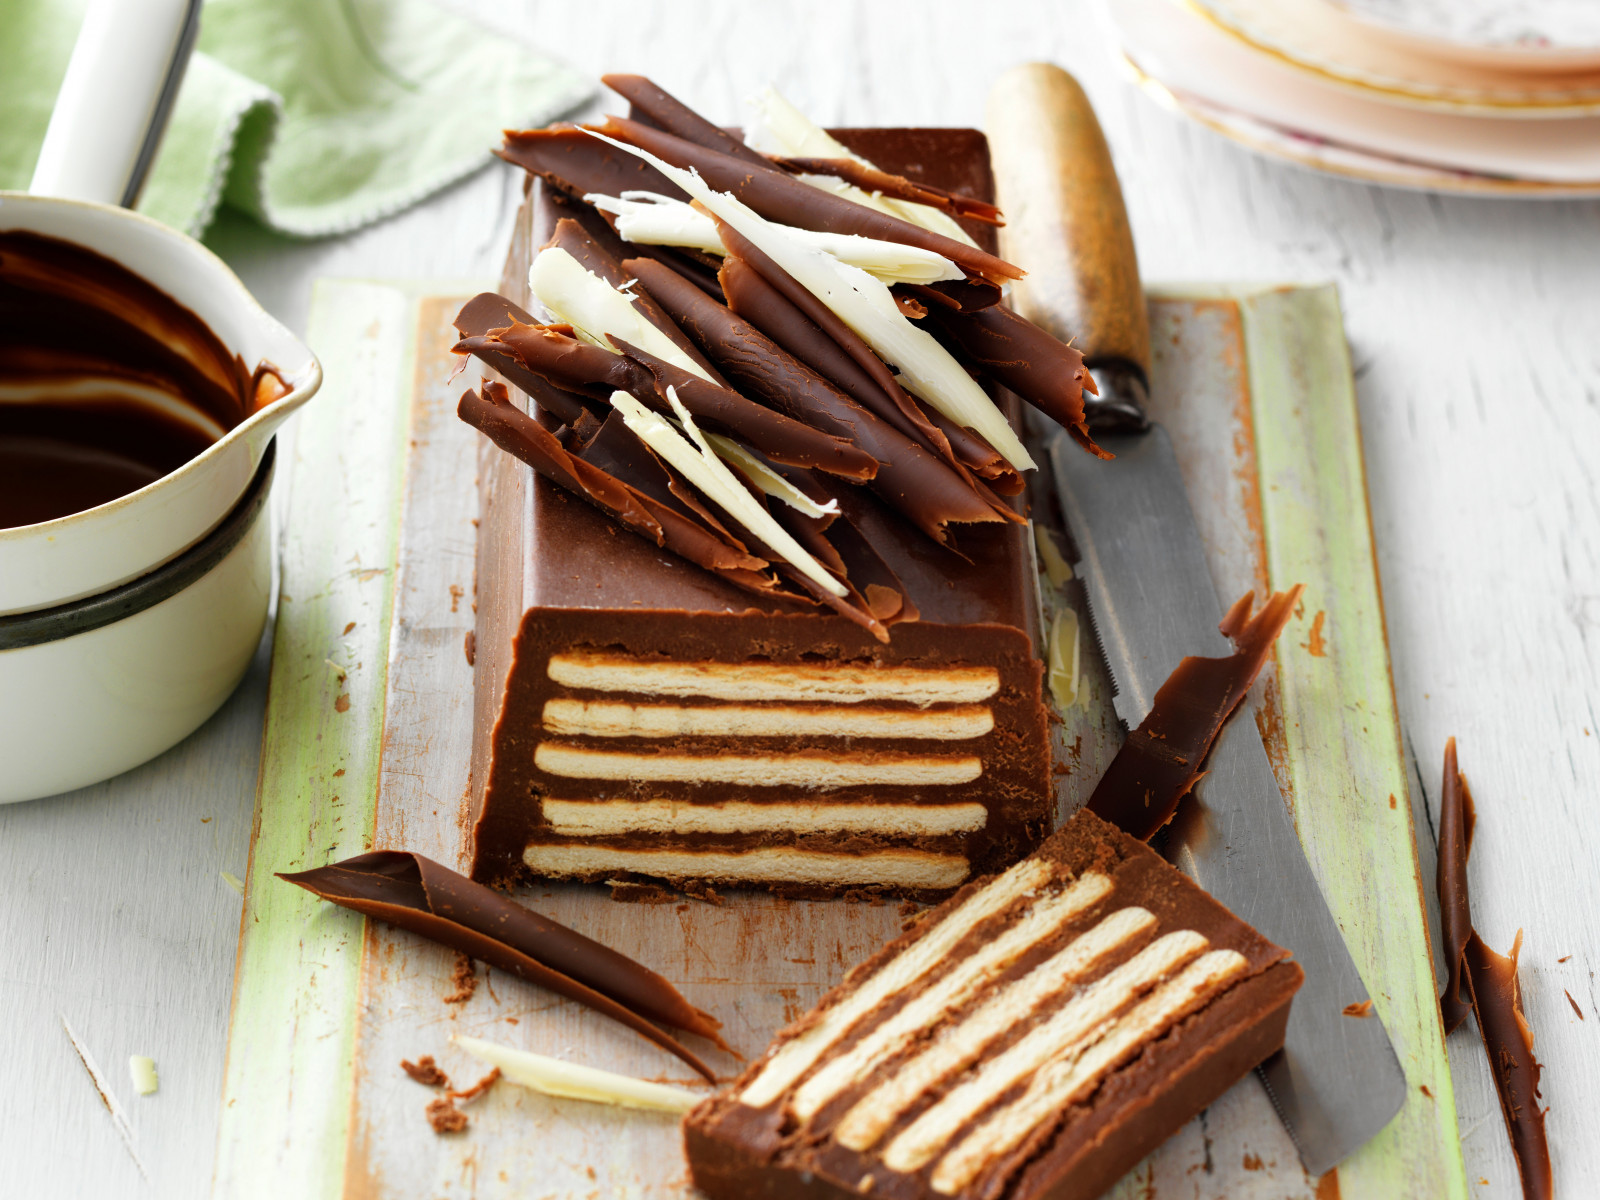 Chocolate Biscuit Cake Caramel On Wooden Stock Photo 2177549043 |  Shutterstock